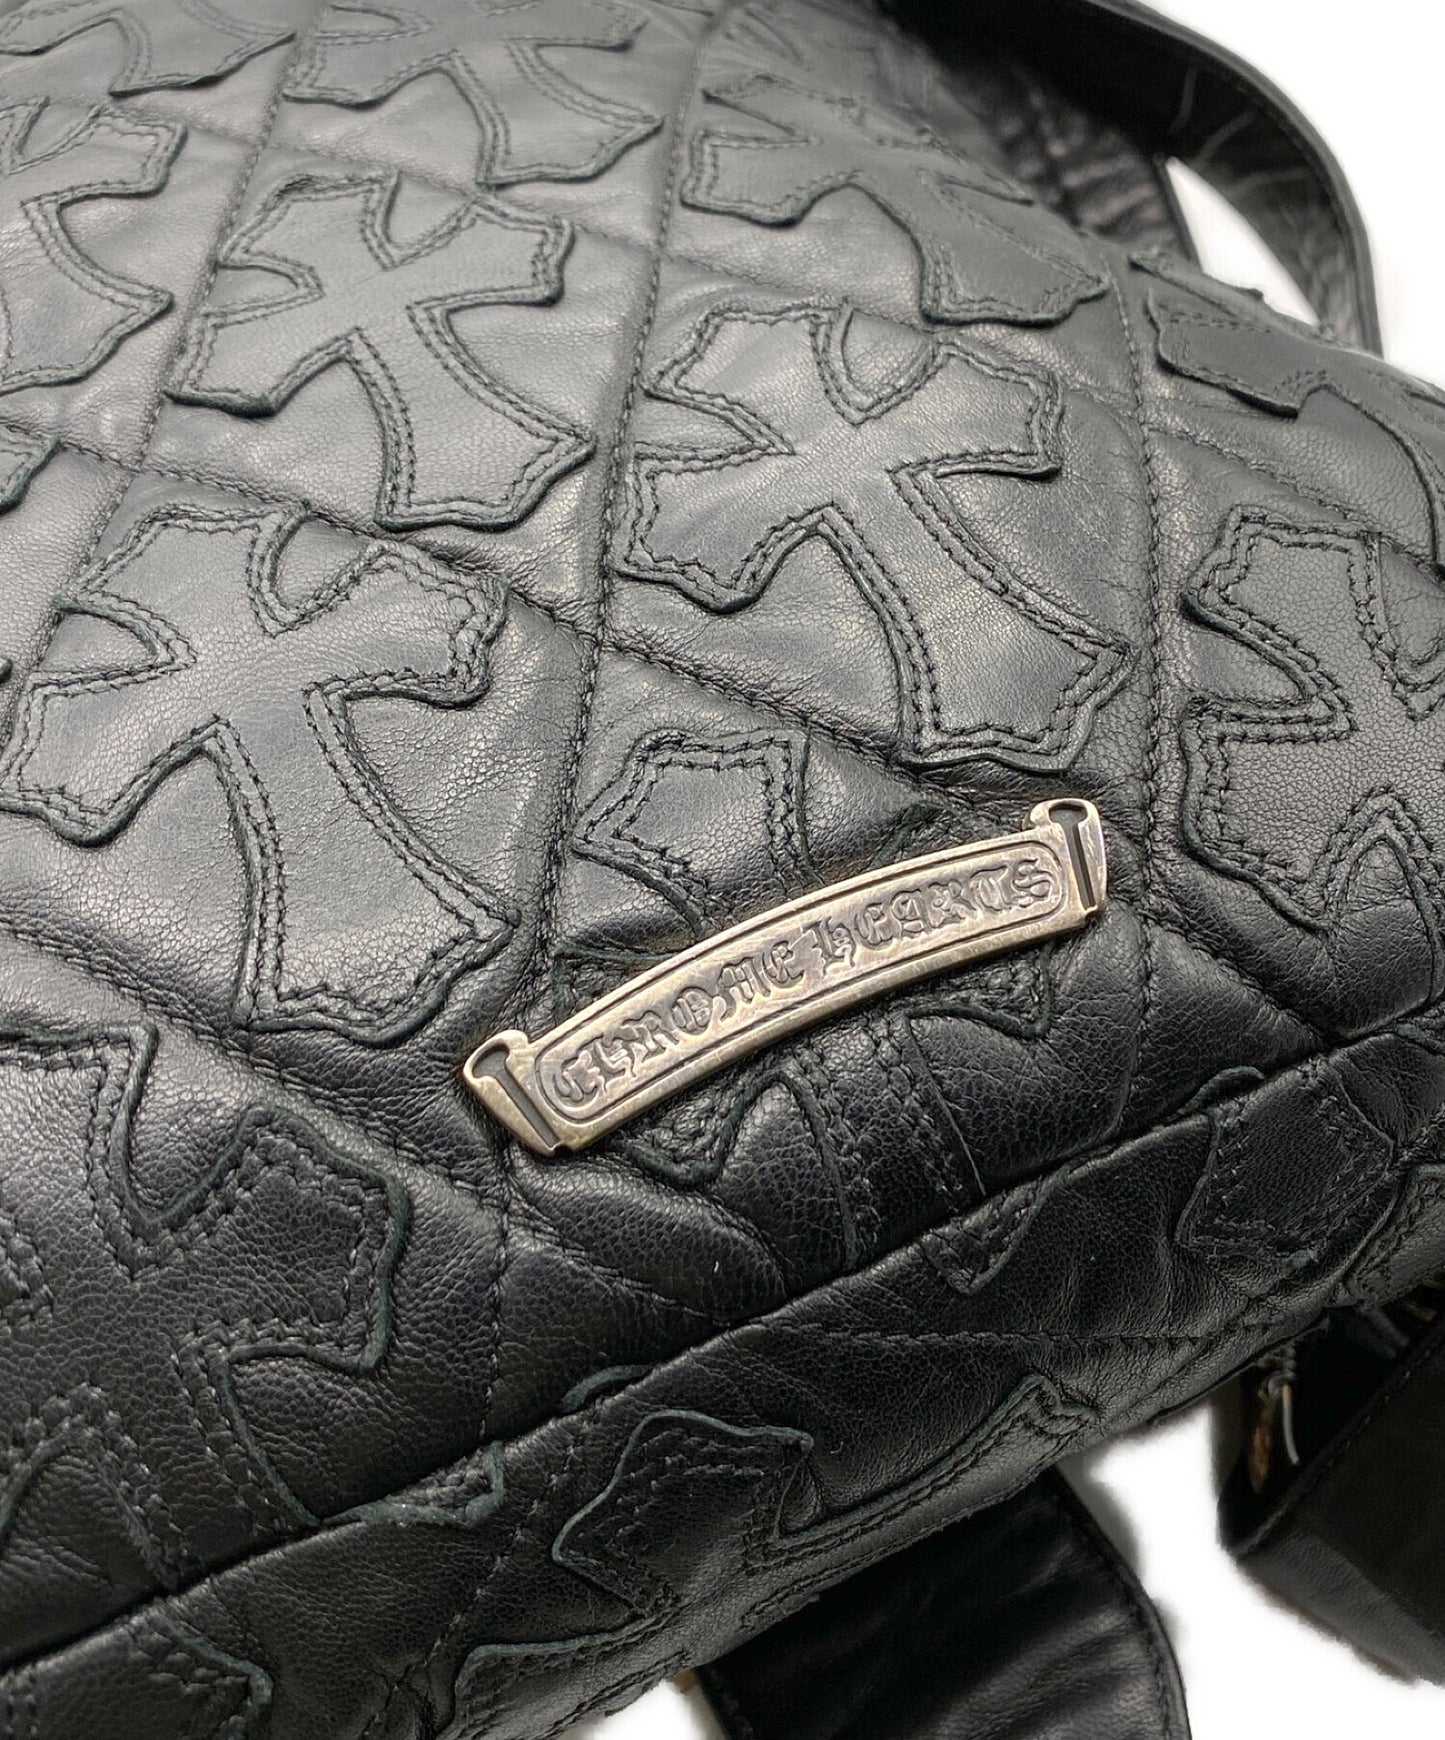 Chrome Hearts G-Bender Cemetery Cross Patch Leather Bag